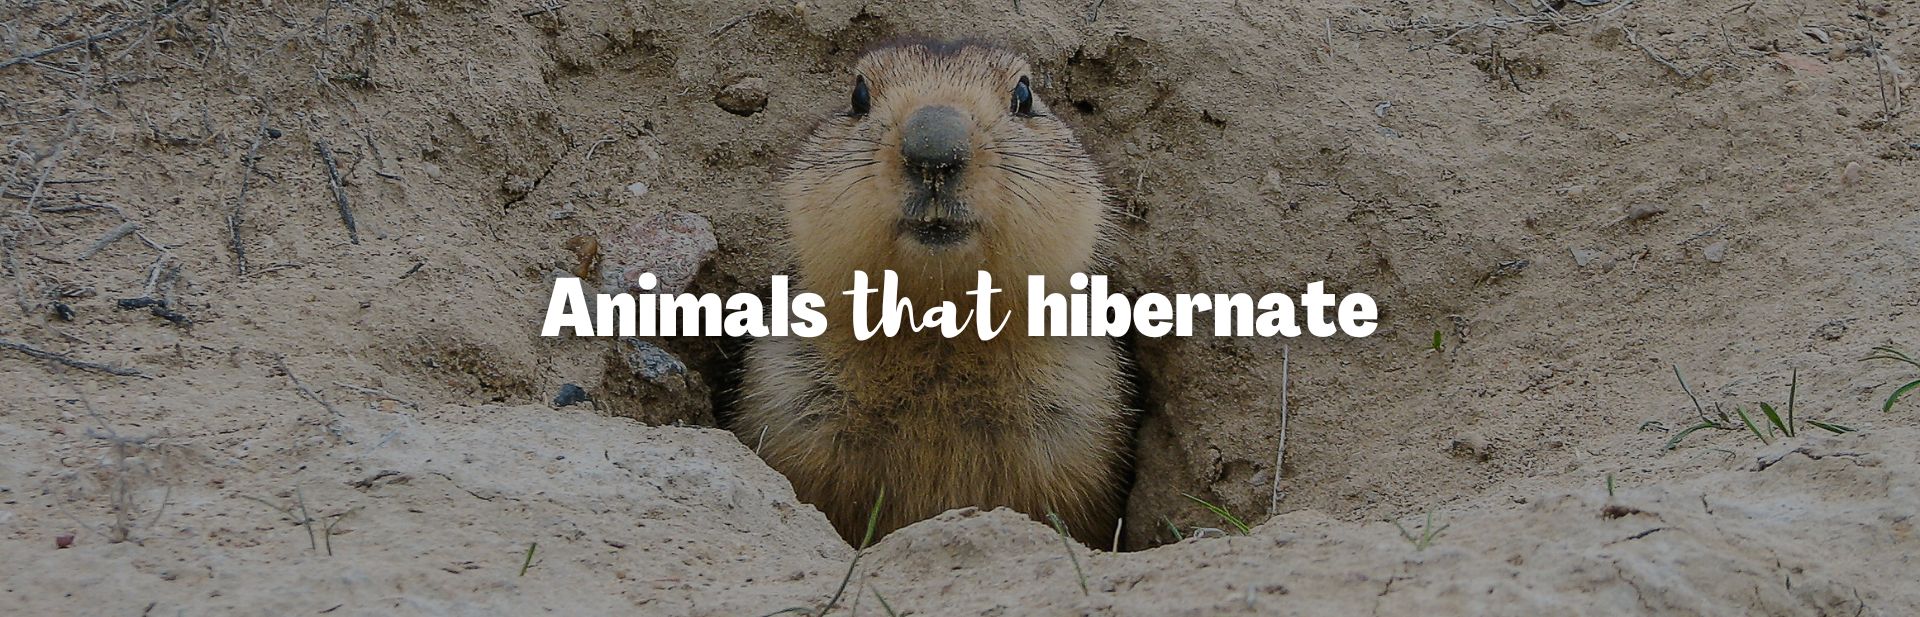 13 Animals That Hibernate: Identification Guide + Pictures and Facts